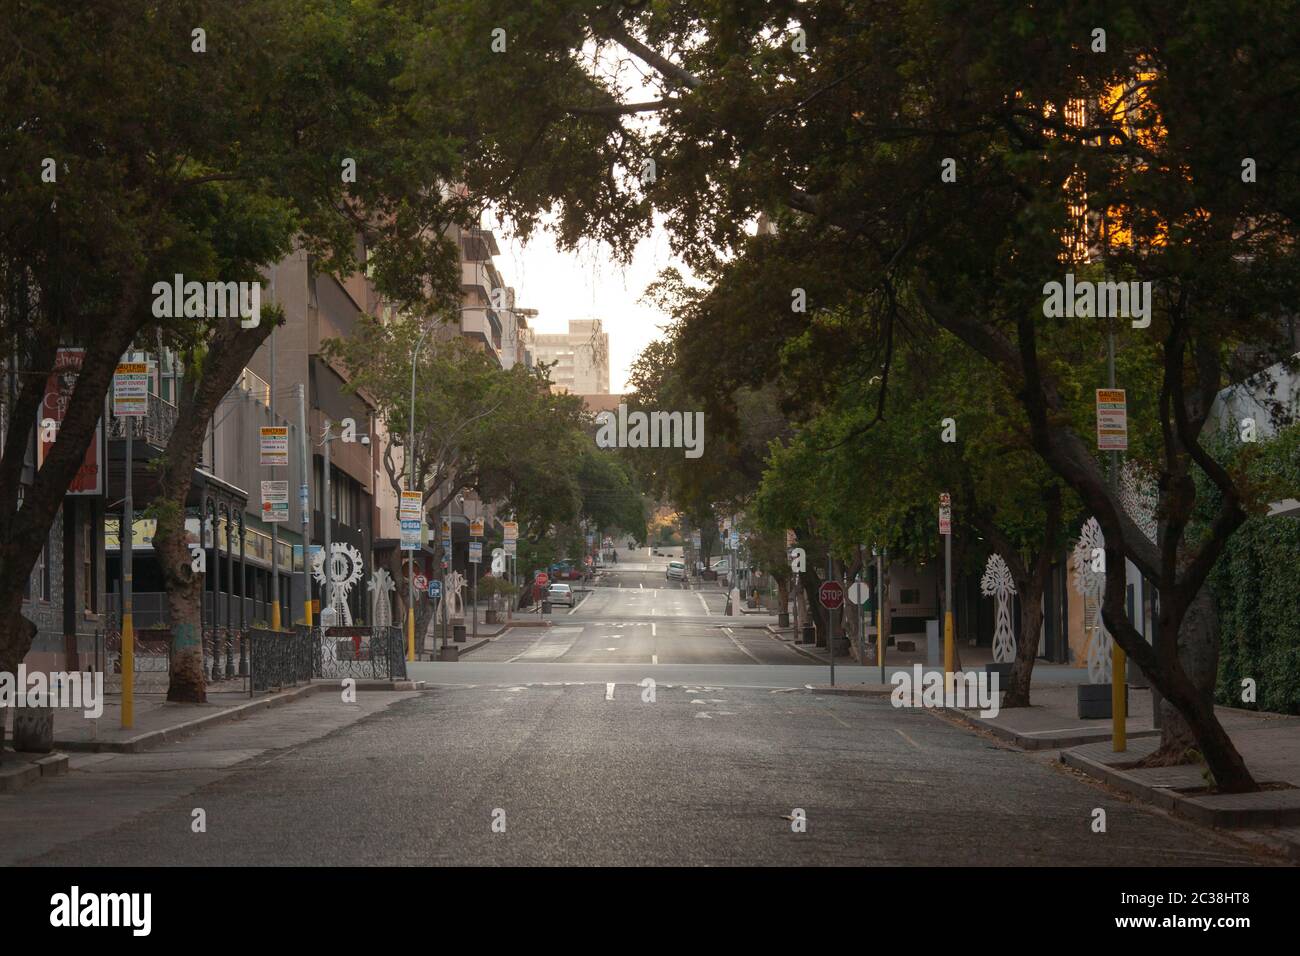 The Johannesburg CBD as seen under lockdown due to the Coronavirus pandemic in South Africa. Stock Photo